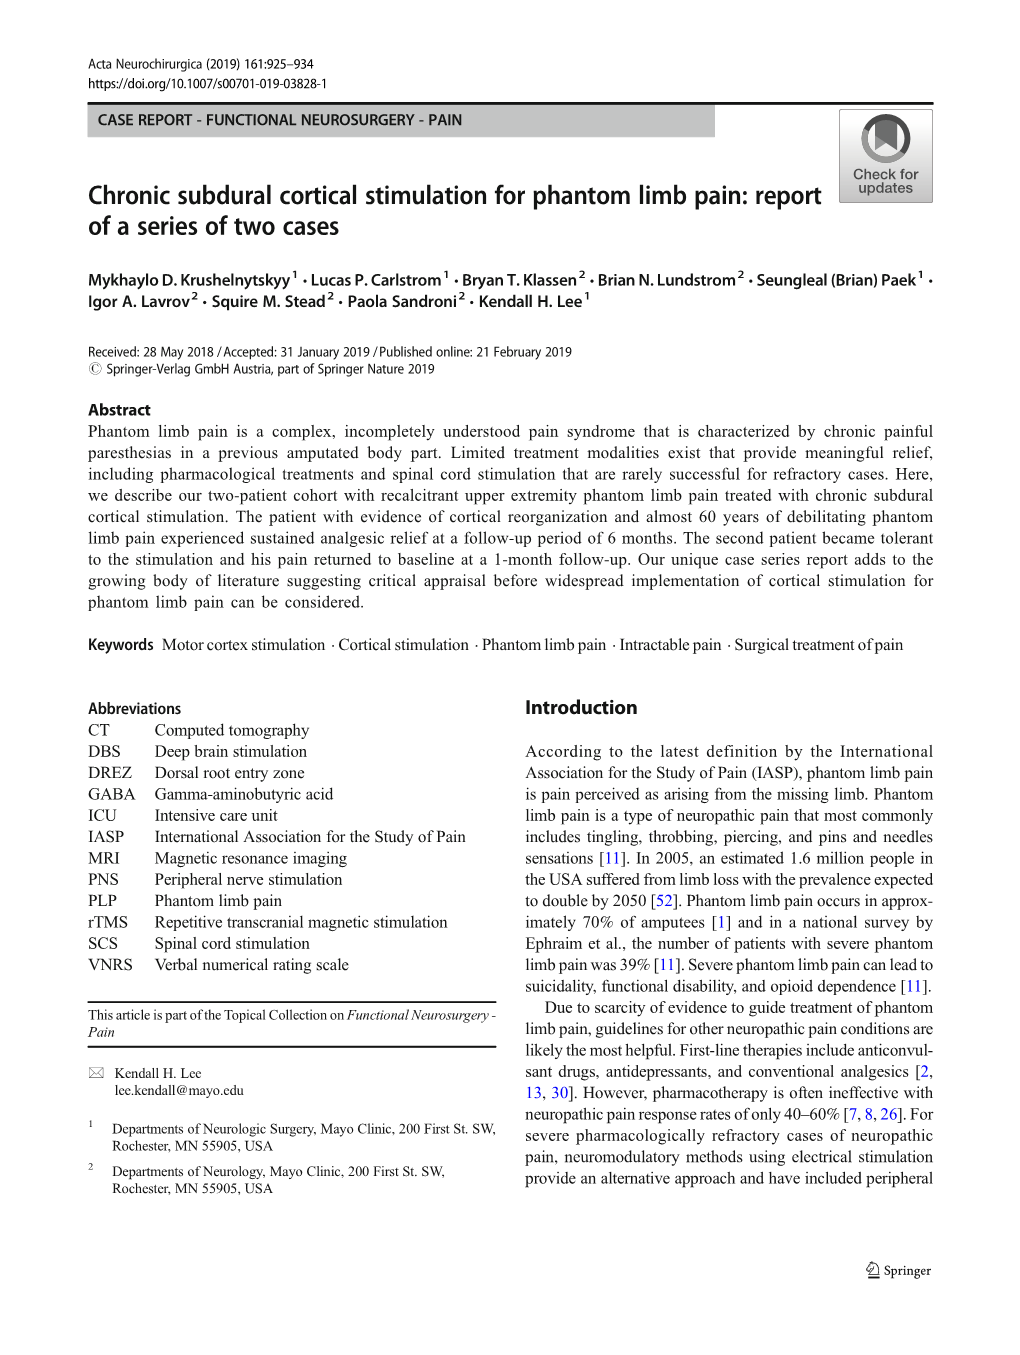 Chronic Subdural Cortical Stimulation for Phantom Limb Pain: Report of a Series of Two Cases